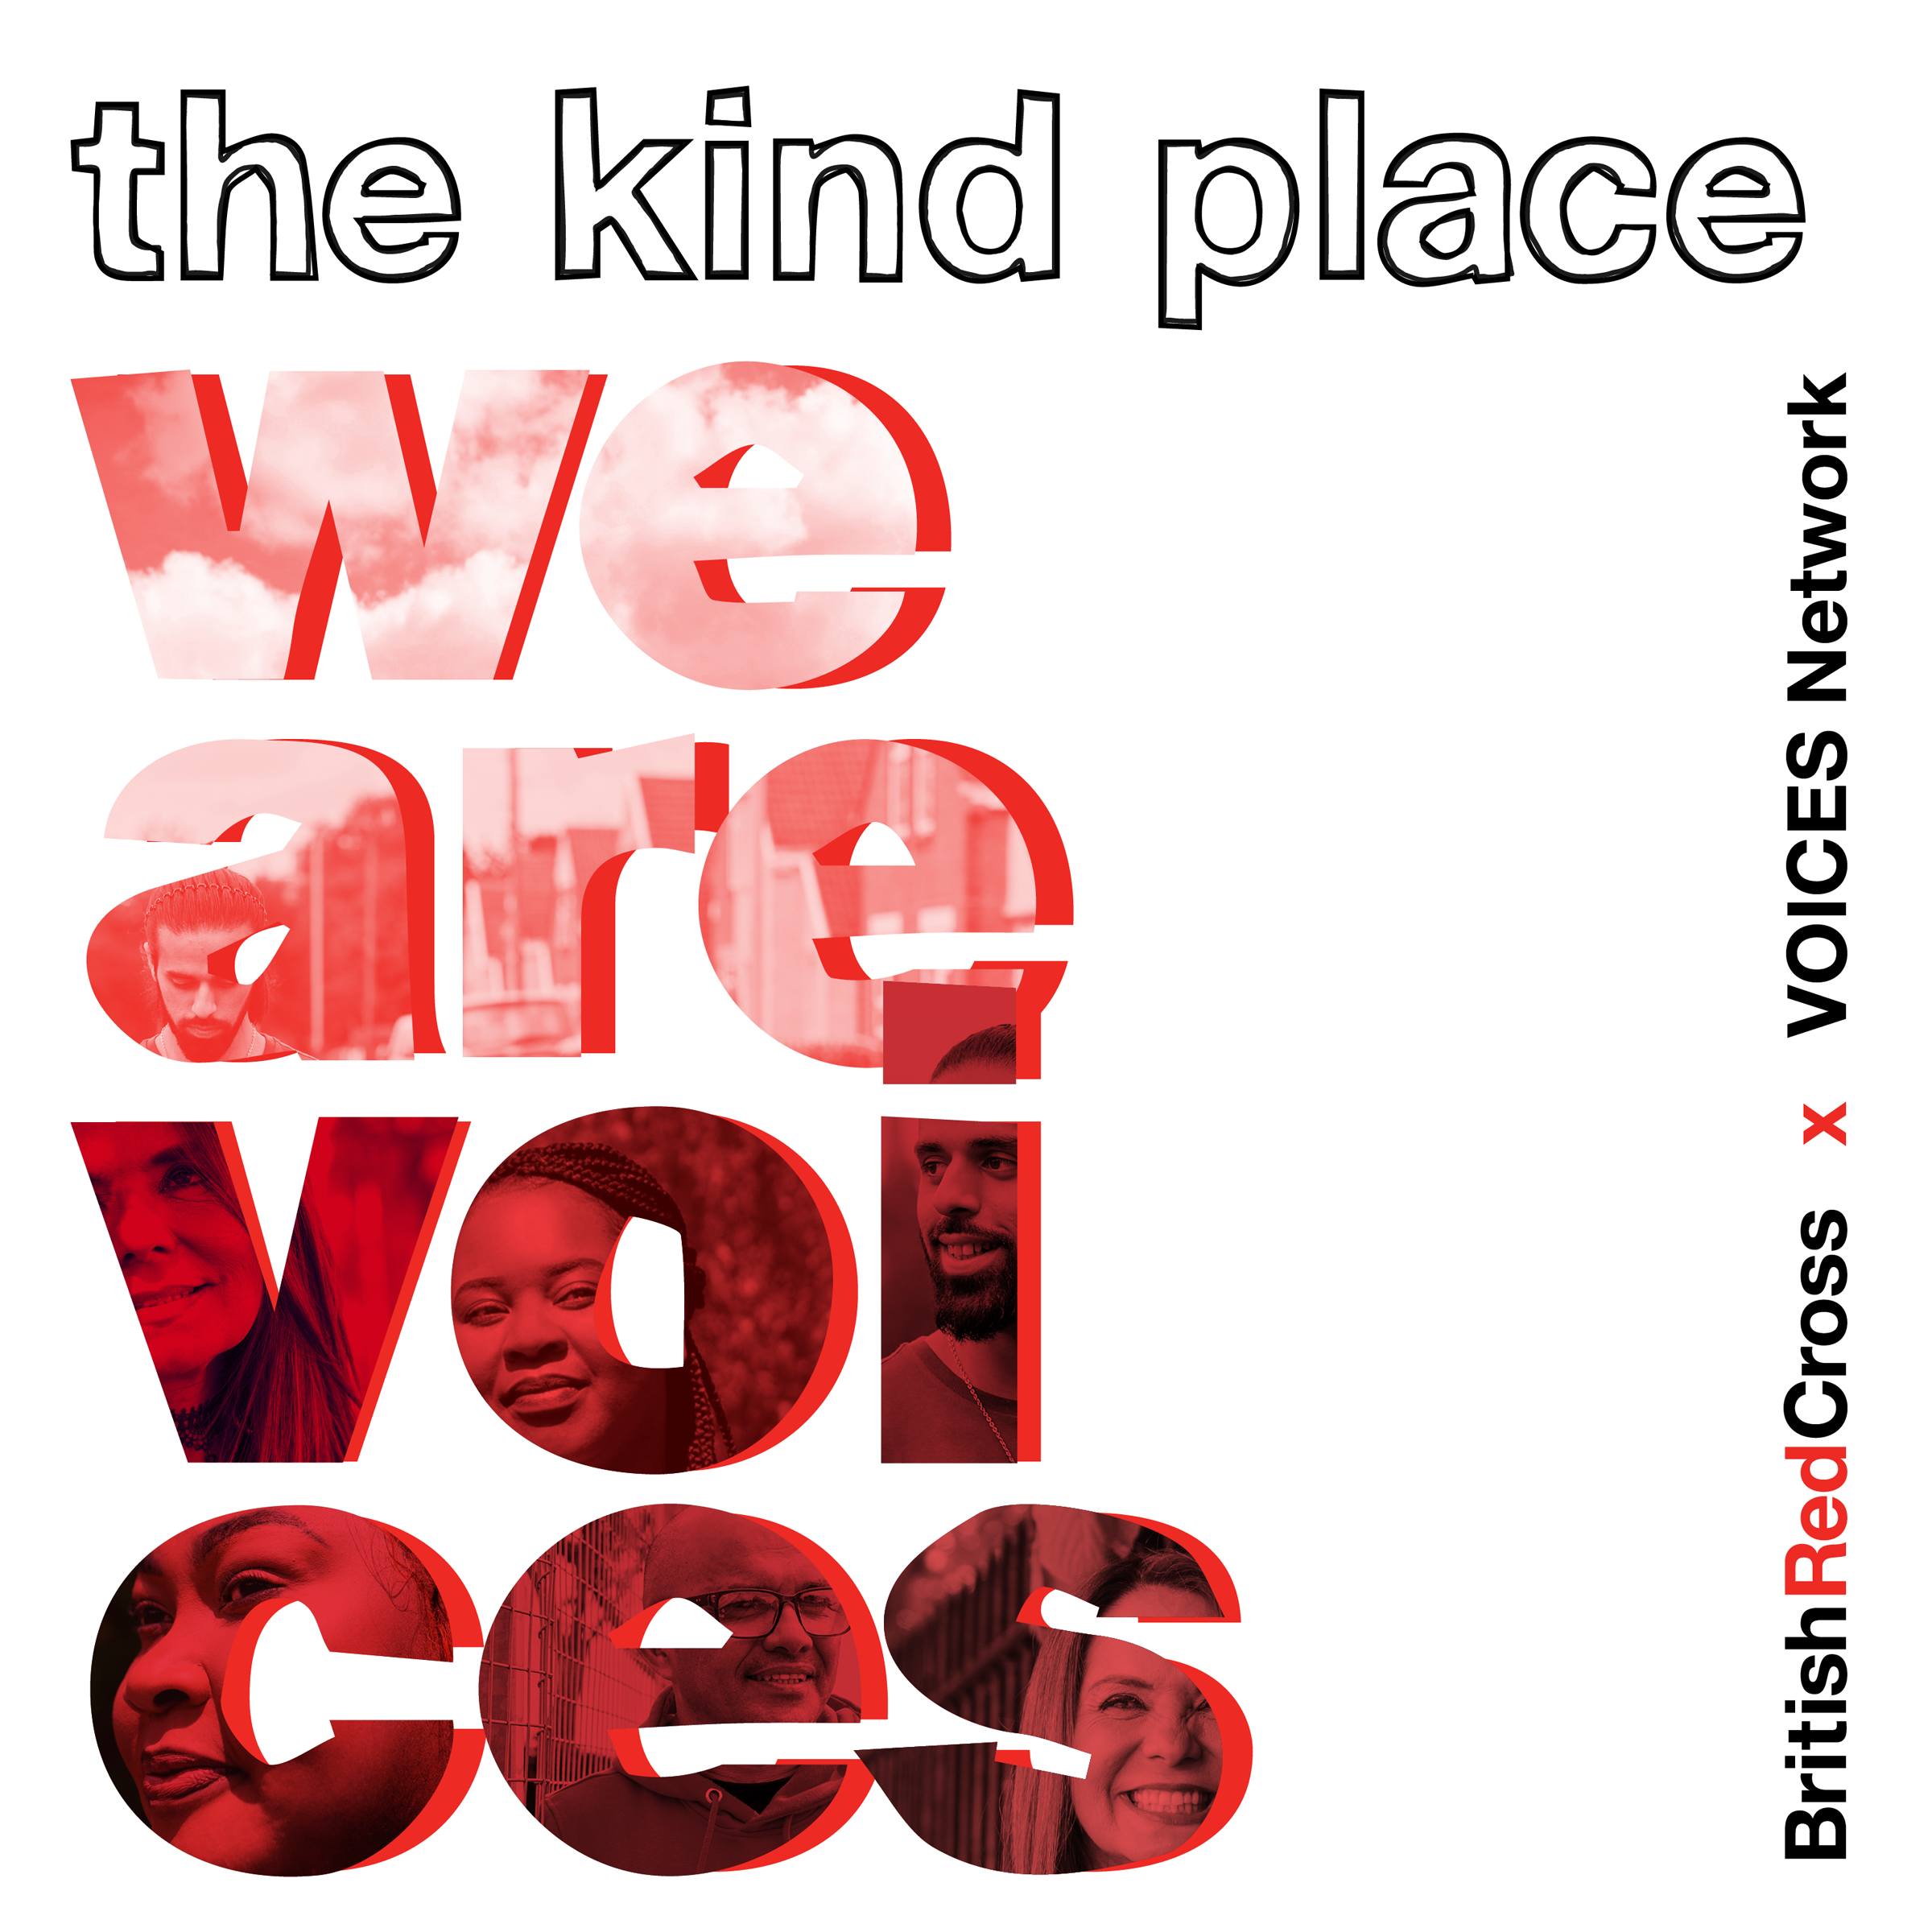 Artwork for The Kind Place: Series 2: We Are VOICES